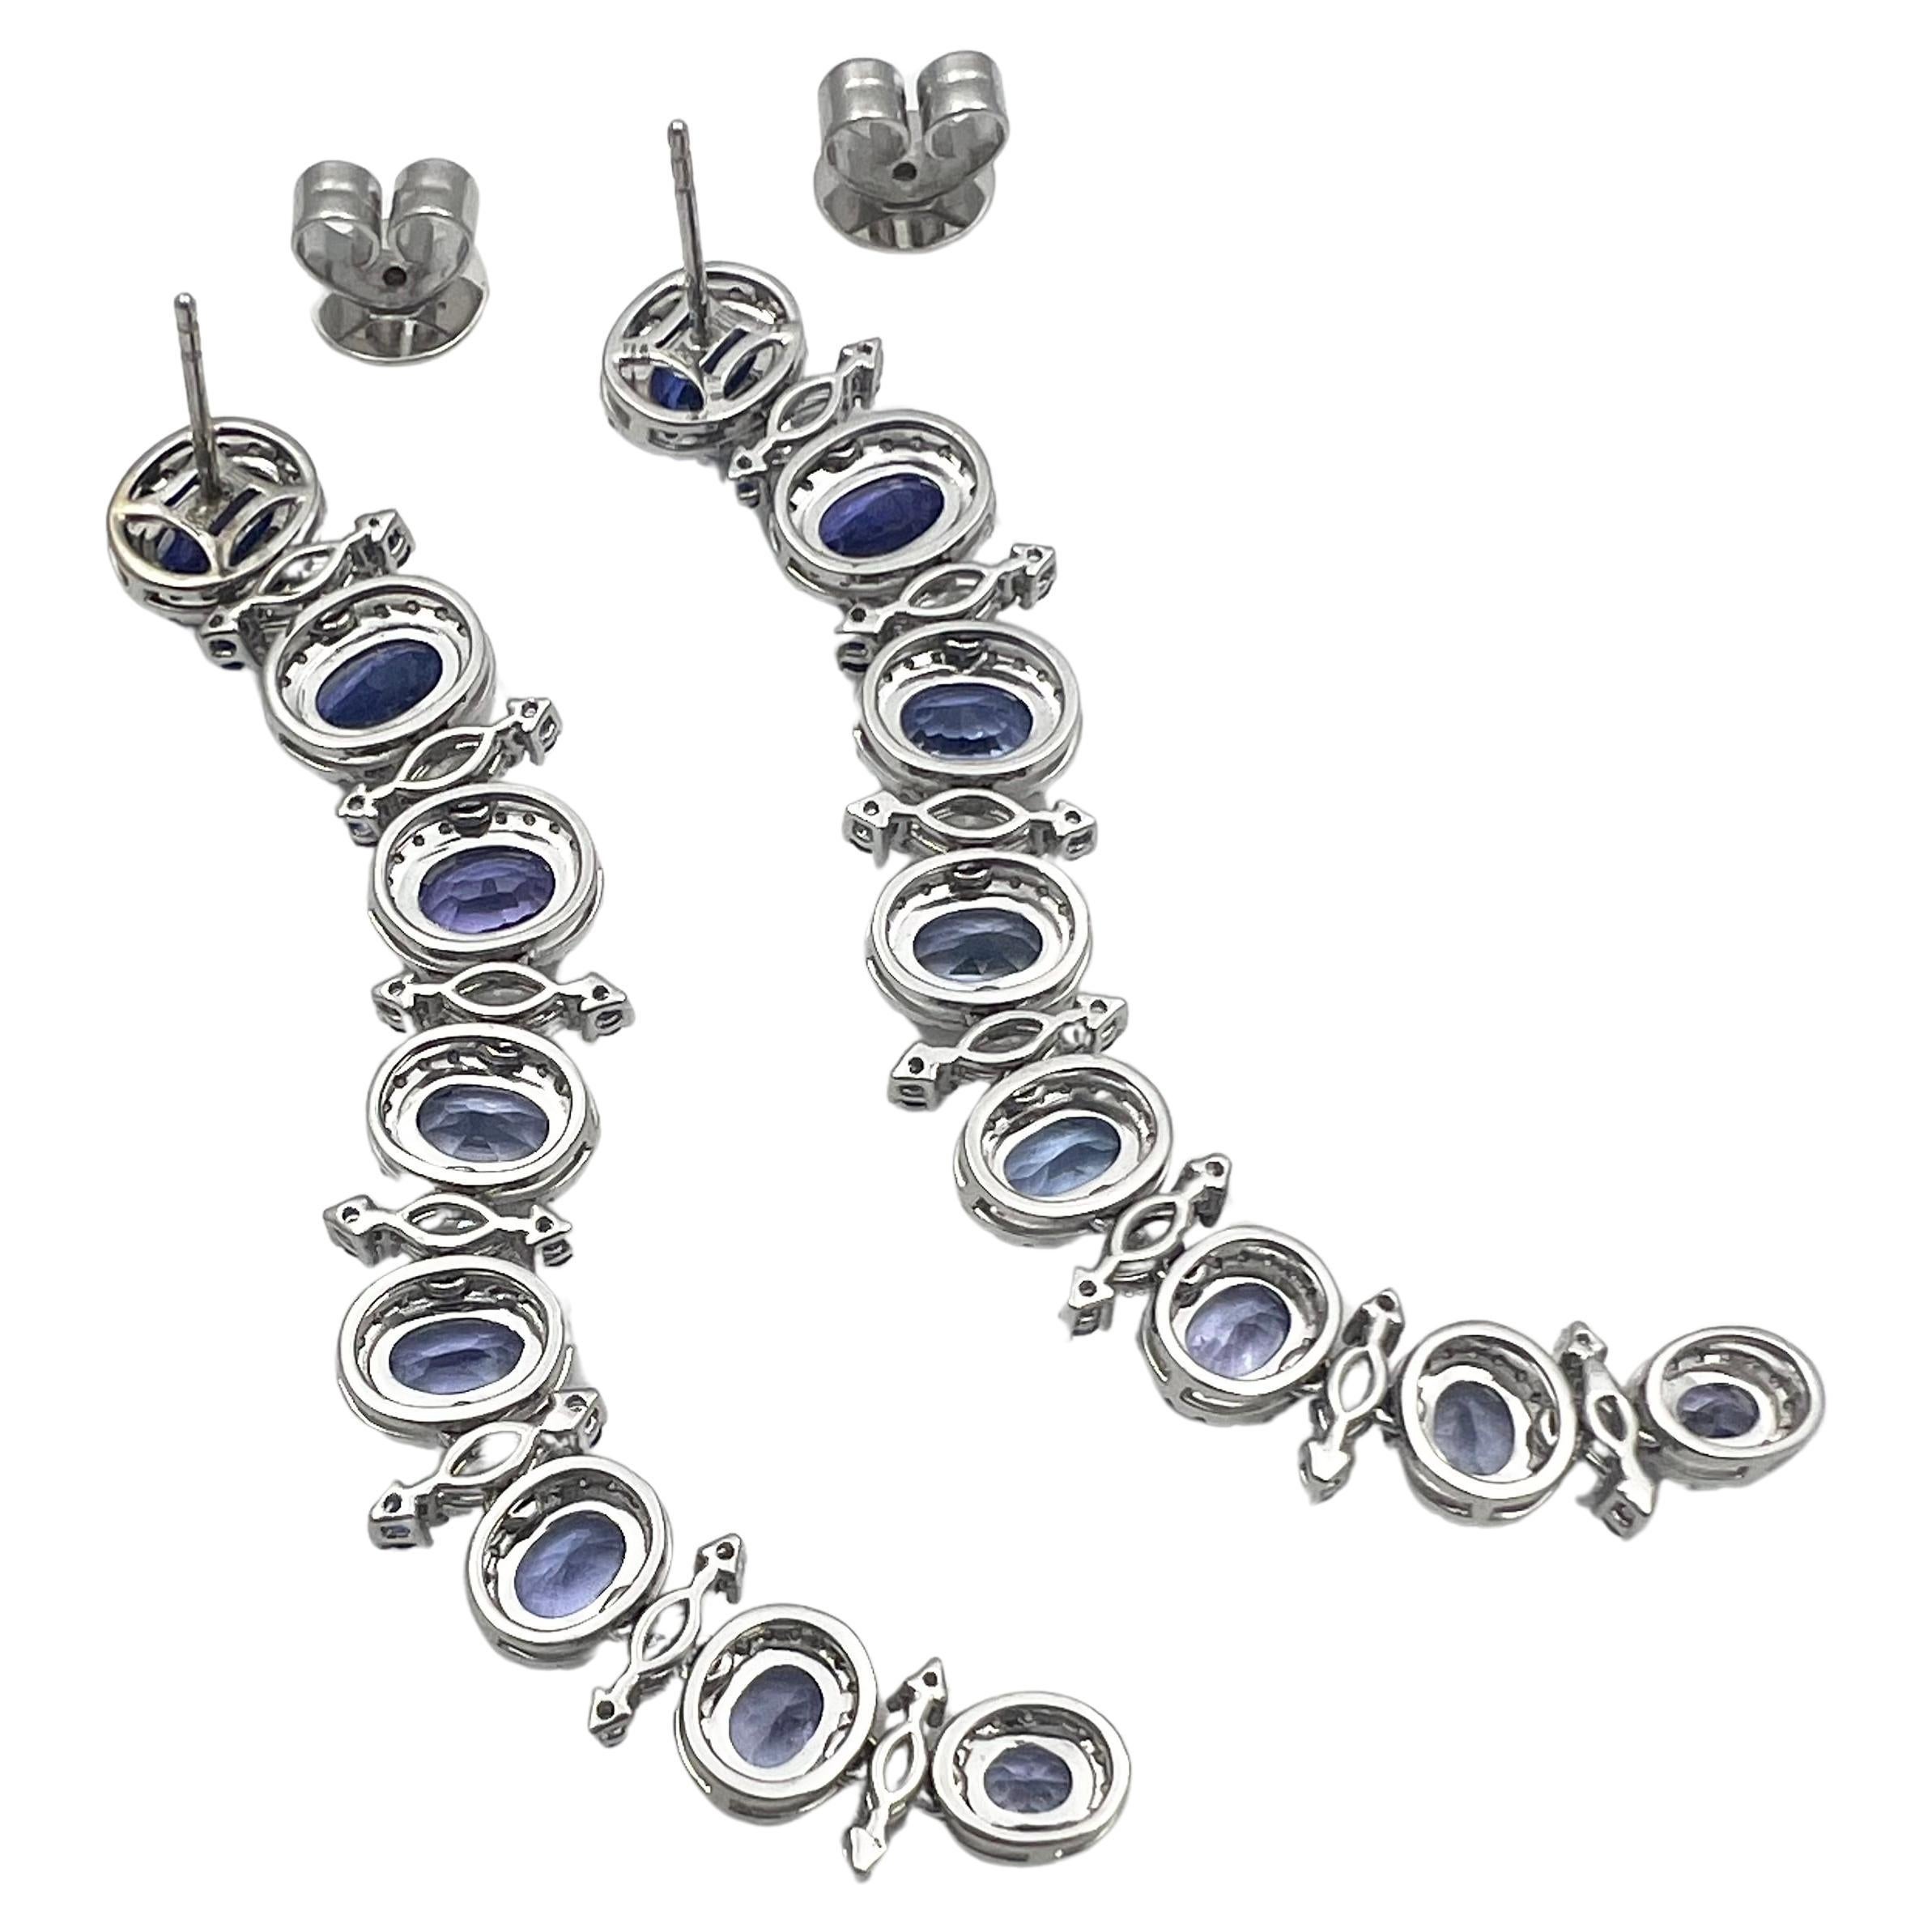 Tapered long earrings 18k white gold set with tanzanite and diamonds.  Measuring 2.75 inches in length. Having sixteen vibrant violet-blue, oval faceted, natural tanzanite surrounded by round brilliant cut diamonds.  Set in between each are fourteen